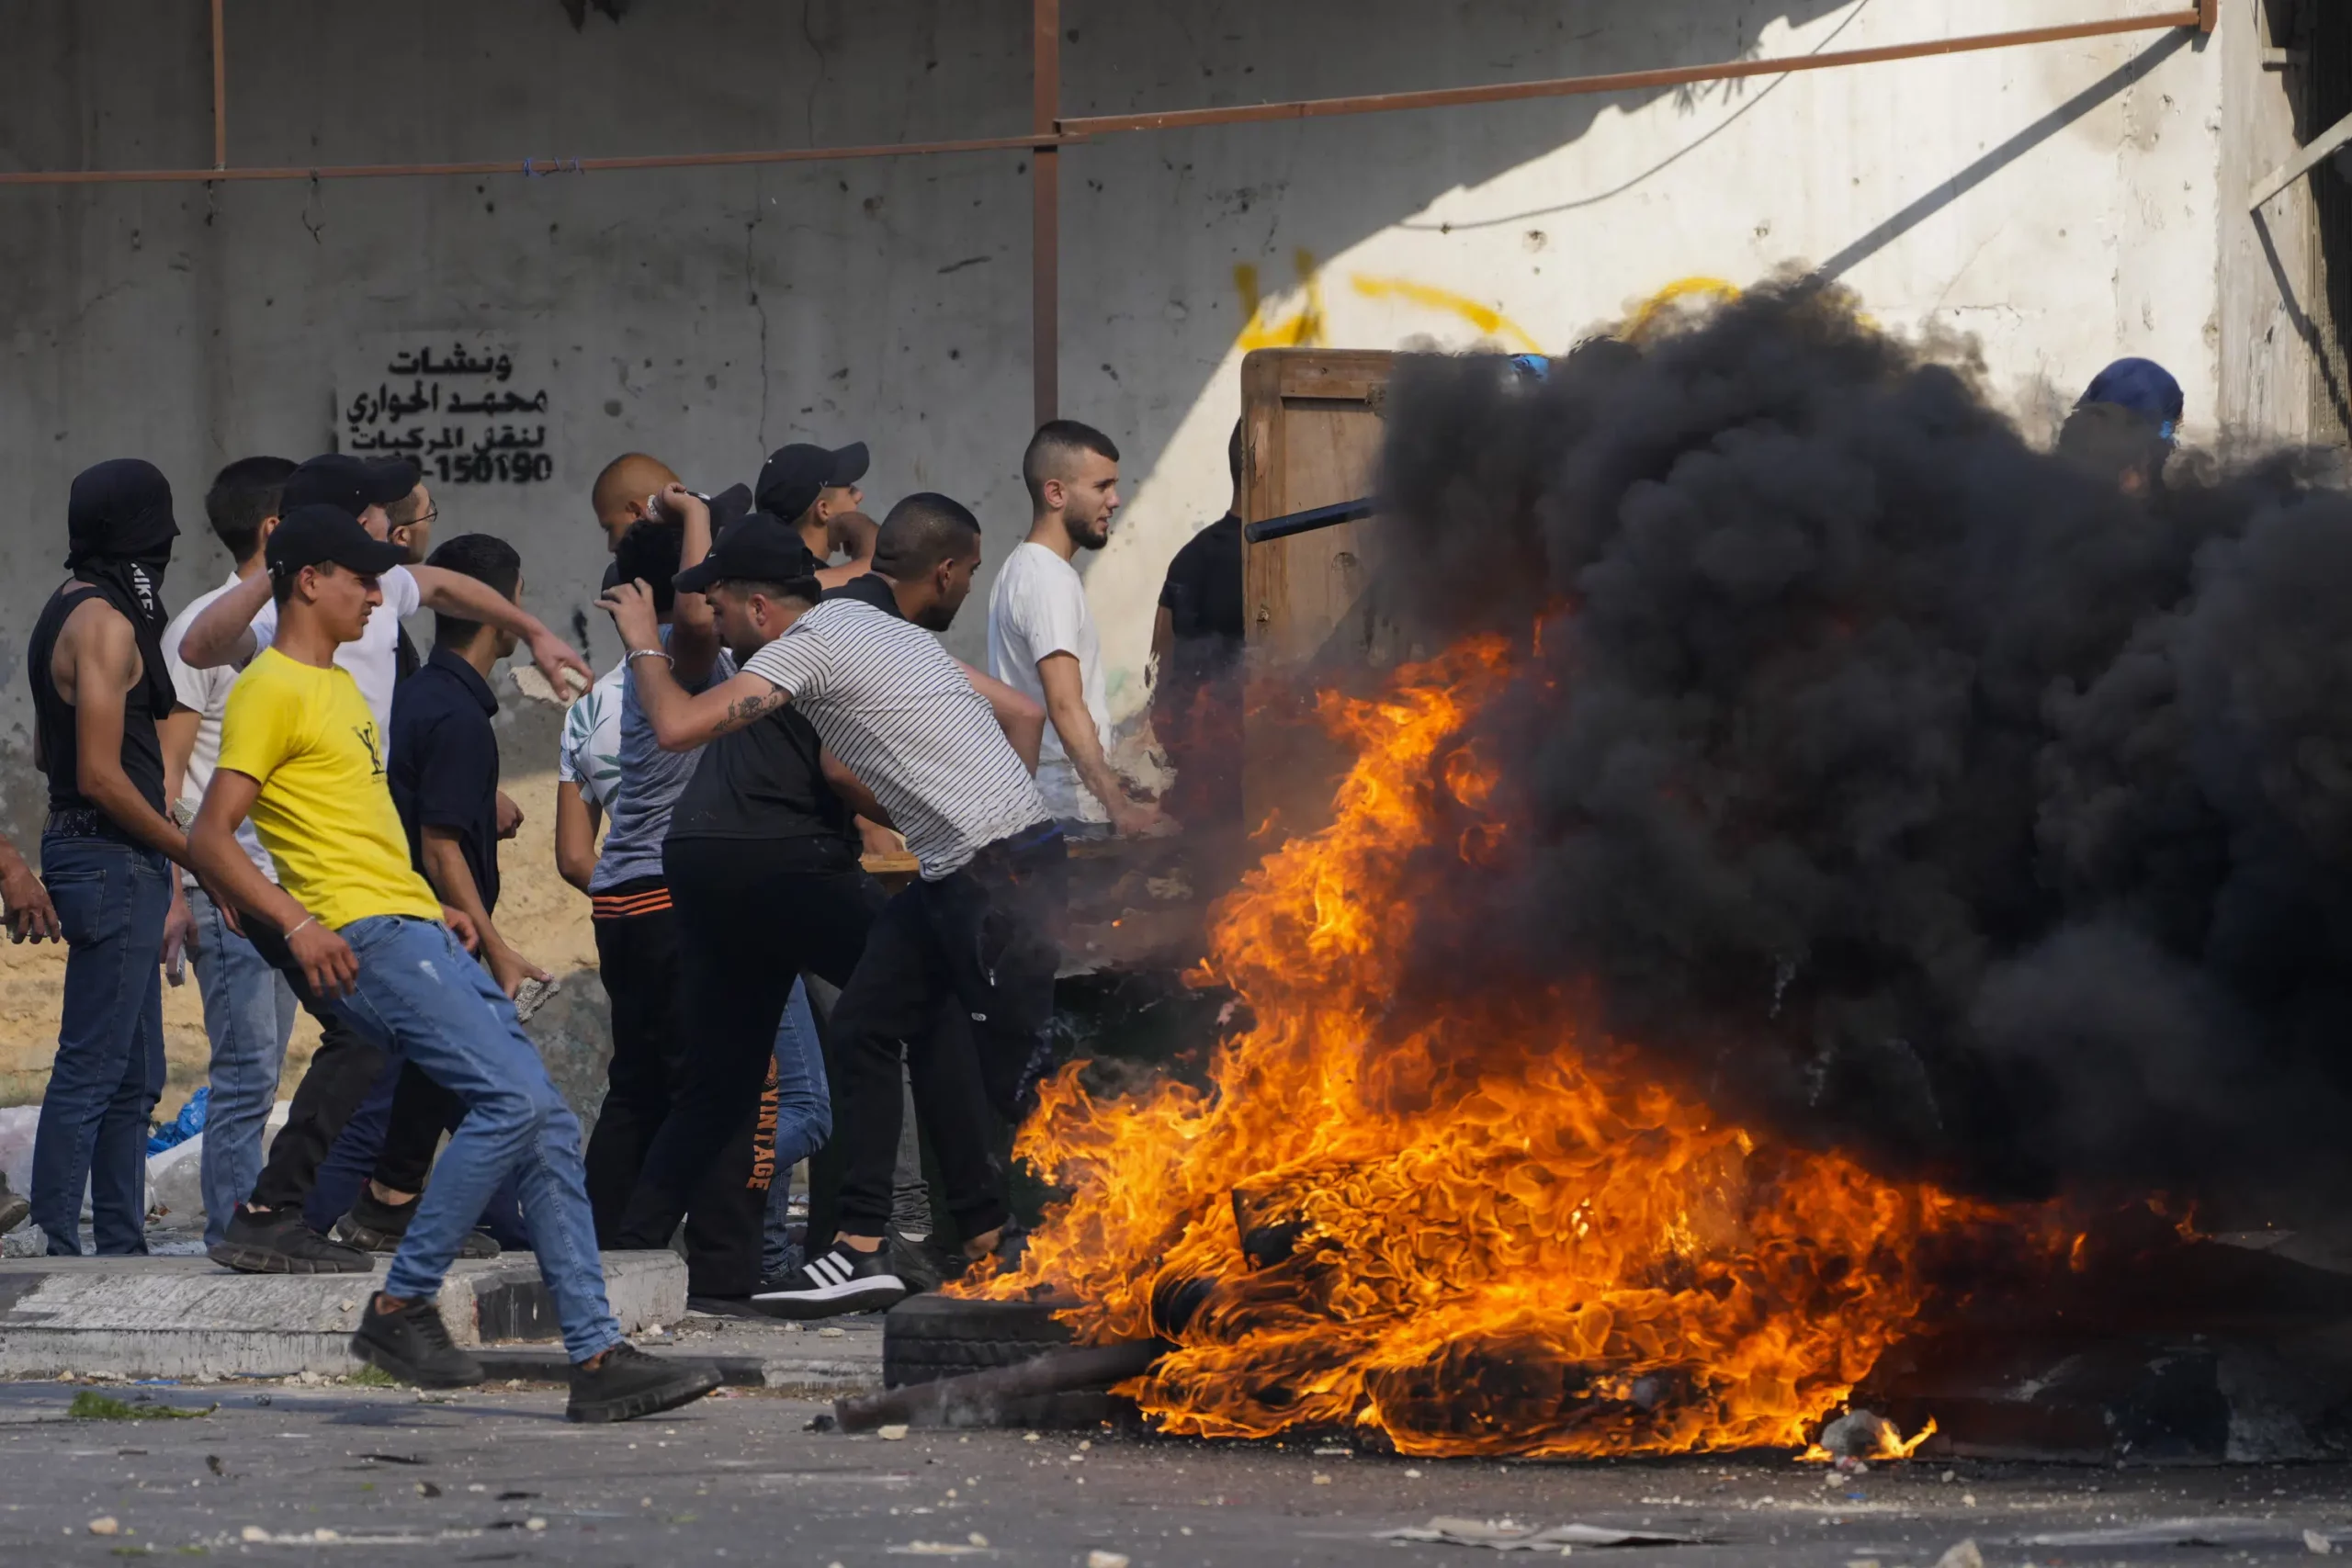 Palestinians: Officials will meet with Israel over violence